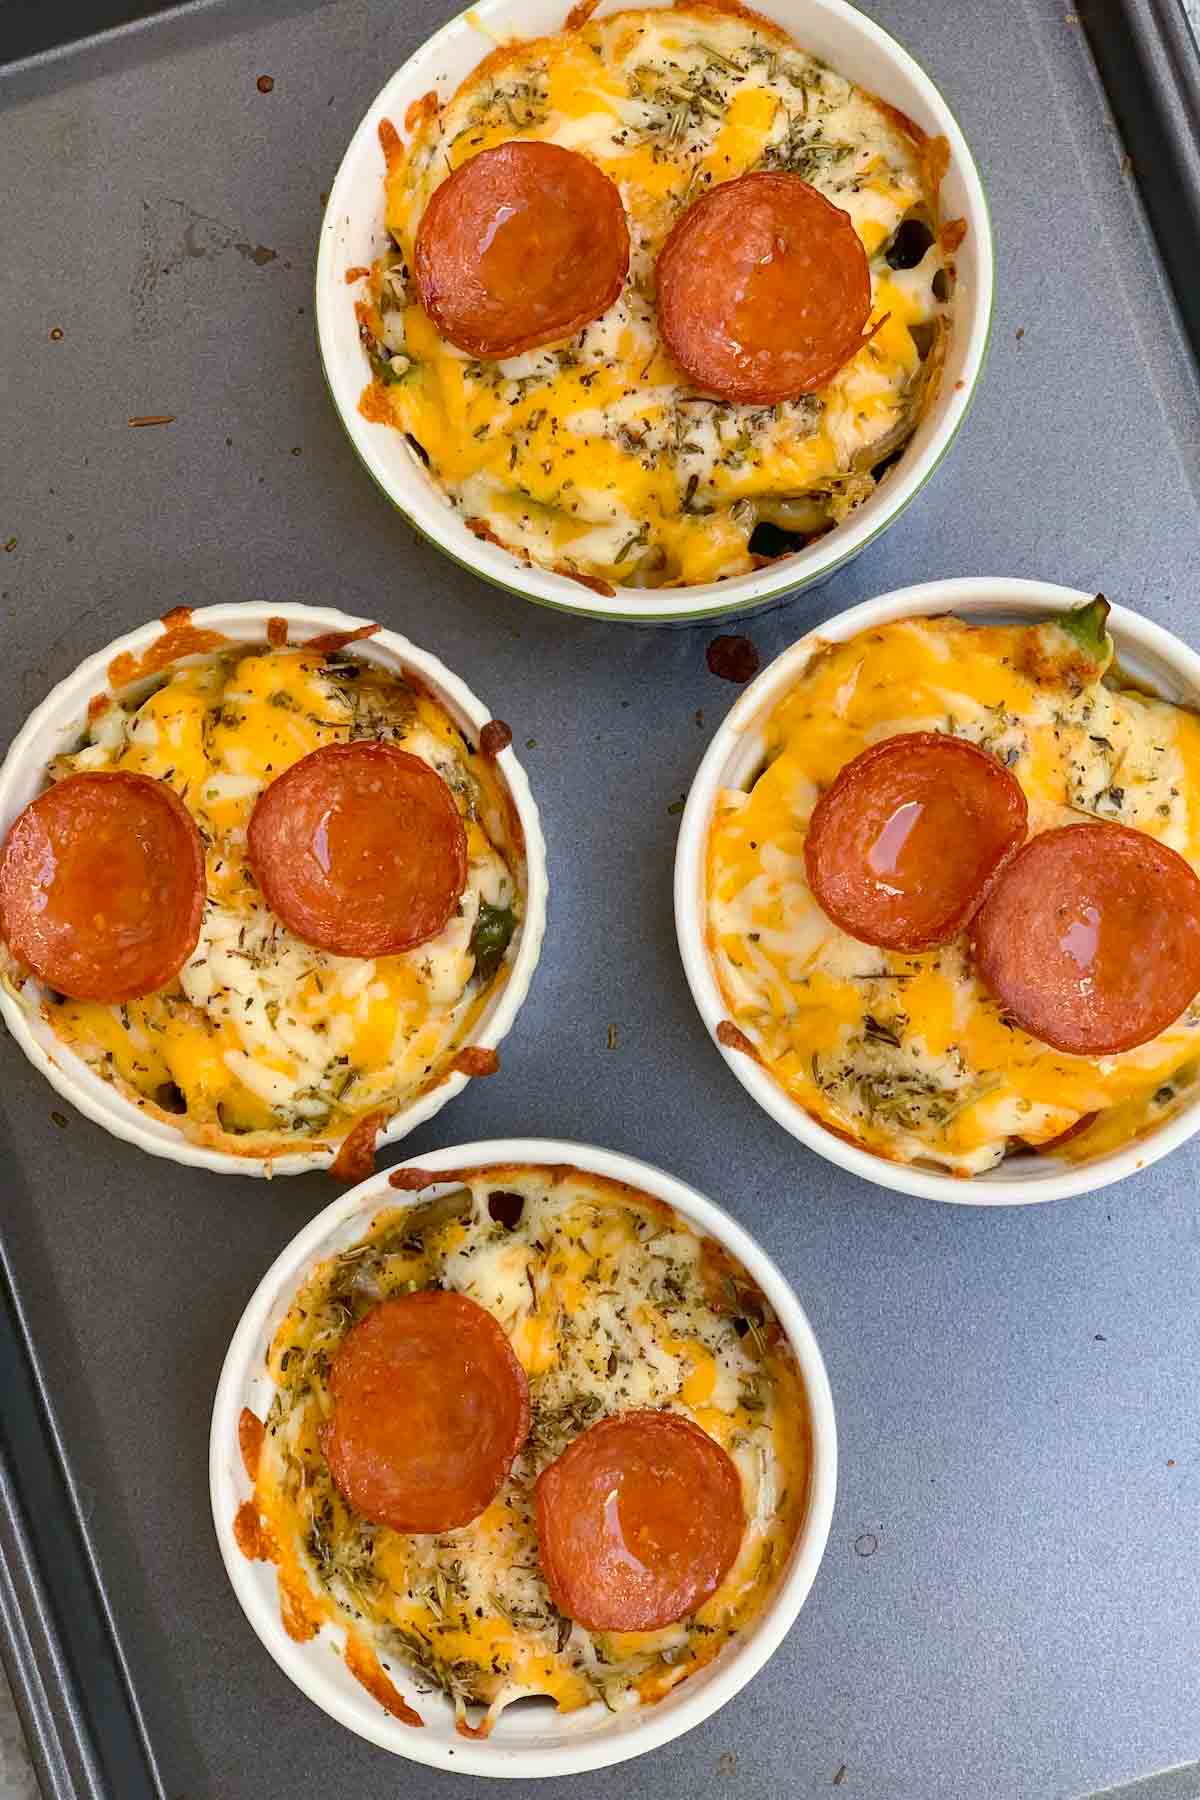 These Easy Pizza Bowls are freshly baked crustless pizza with your favorite toppings like pepperoni, veggies, and cheese! It takes less than 15 minutes to make and this low-carb option will satisfy your pizza cravings without blowing your Macro’s.